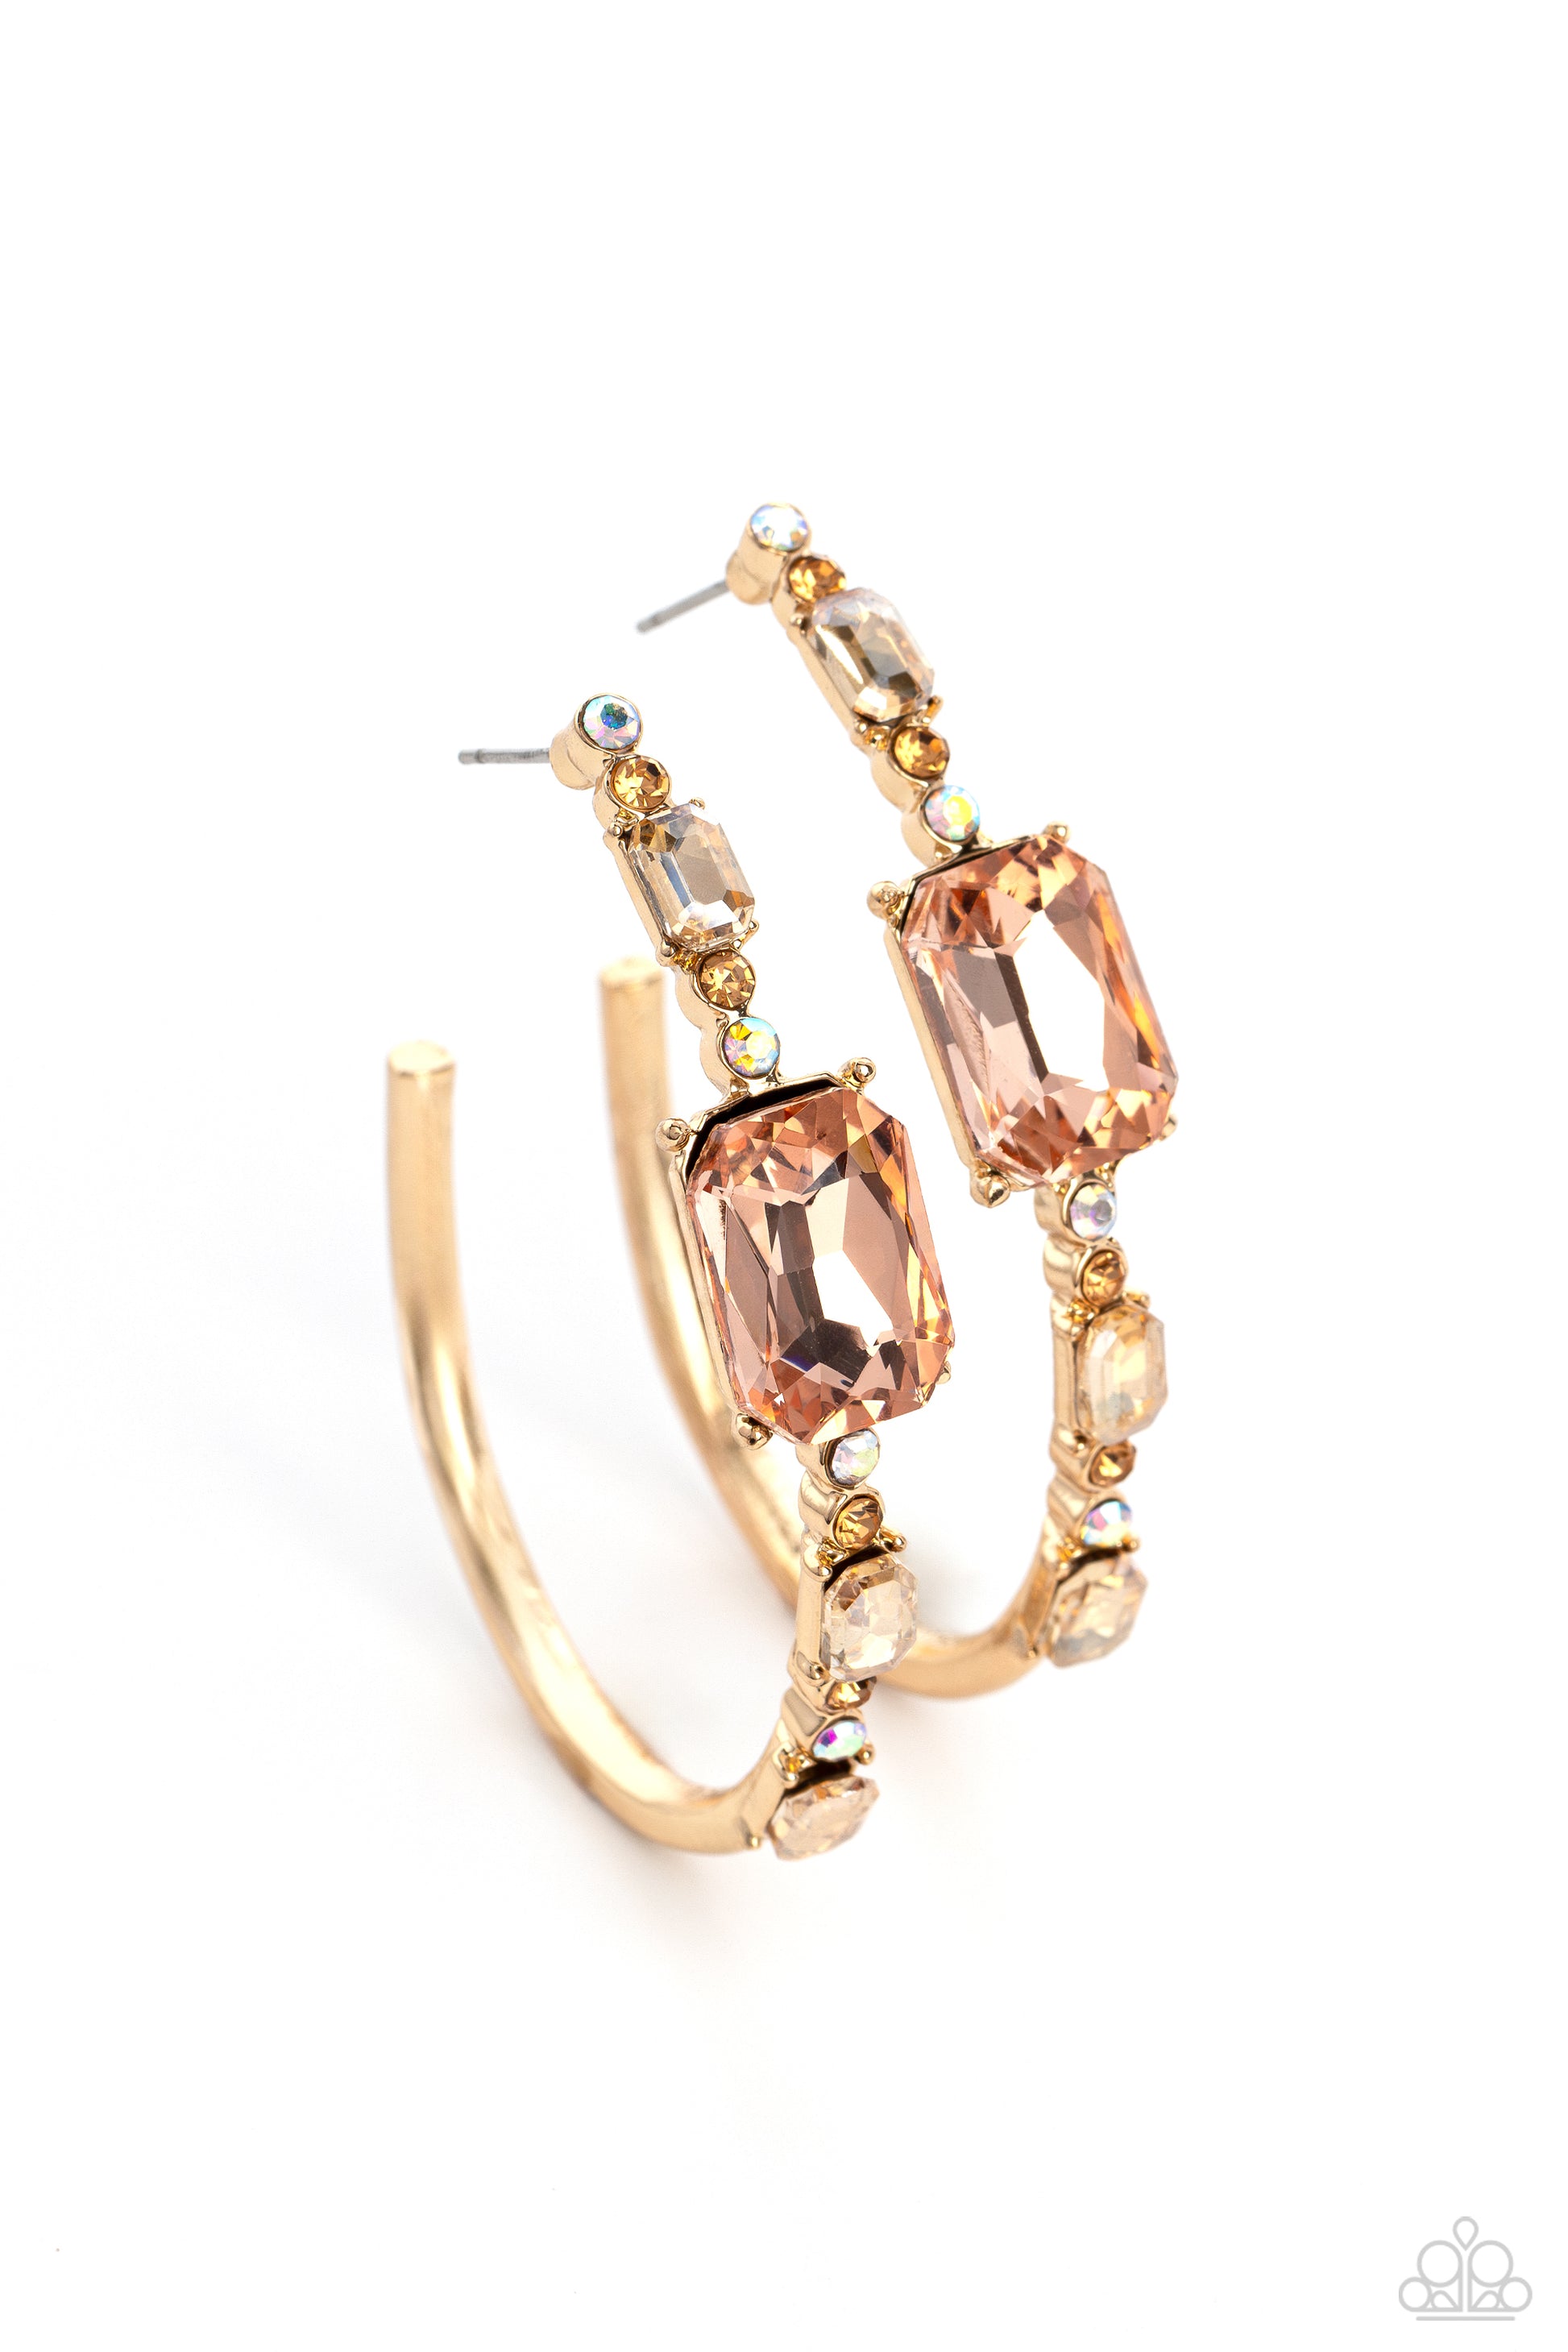 Paparazzi Accessories - Elite Ensemble - Gold Hoop Earrings encrusted in round and emerald-cut champagne, peach, iridescent and golden topaz gems, an exaggerated oblong gold hoop curls around the ear, refracting light in a dramatic, knockout finish. Earring attaches to a standard post fitting. Hoop measures approximately 2" long. Due to its prismatic palette, color may vary.  Sold as one pair of hoop earrings.